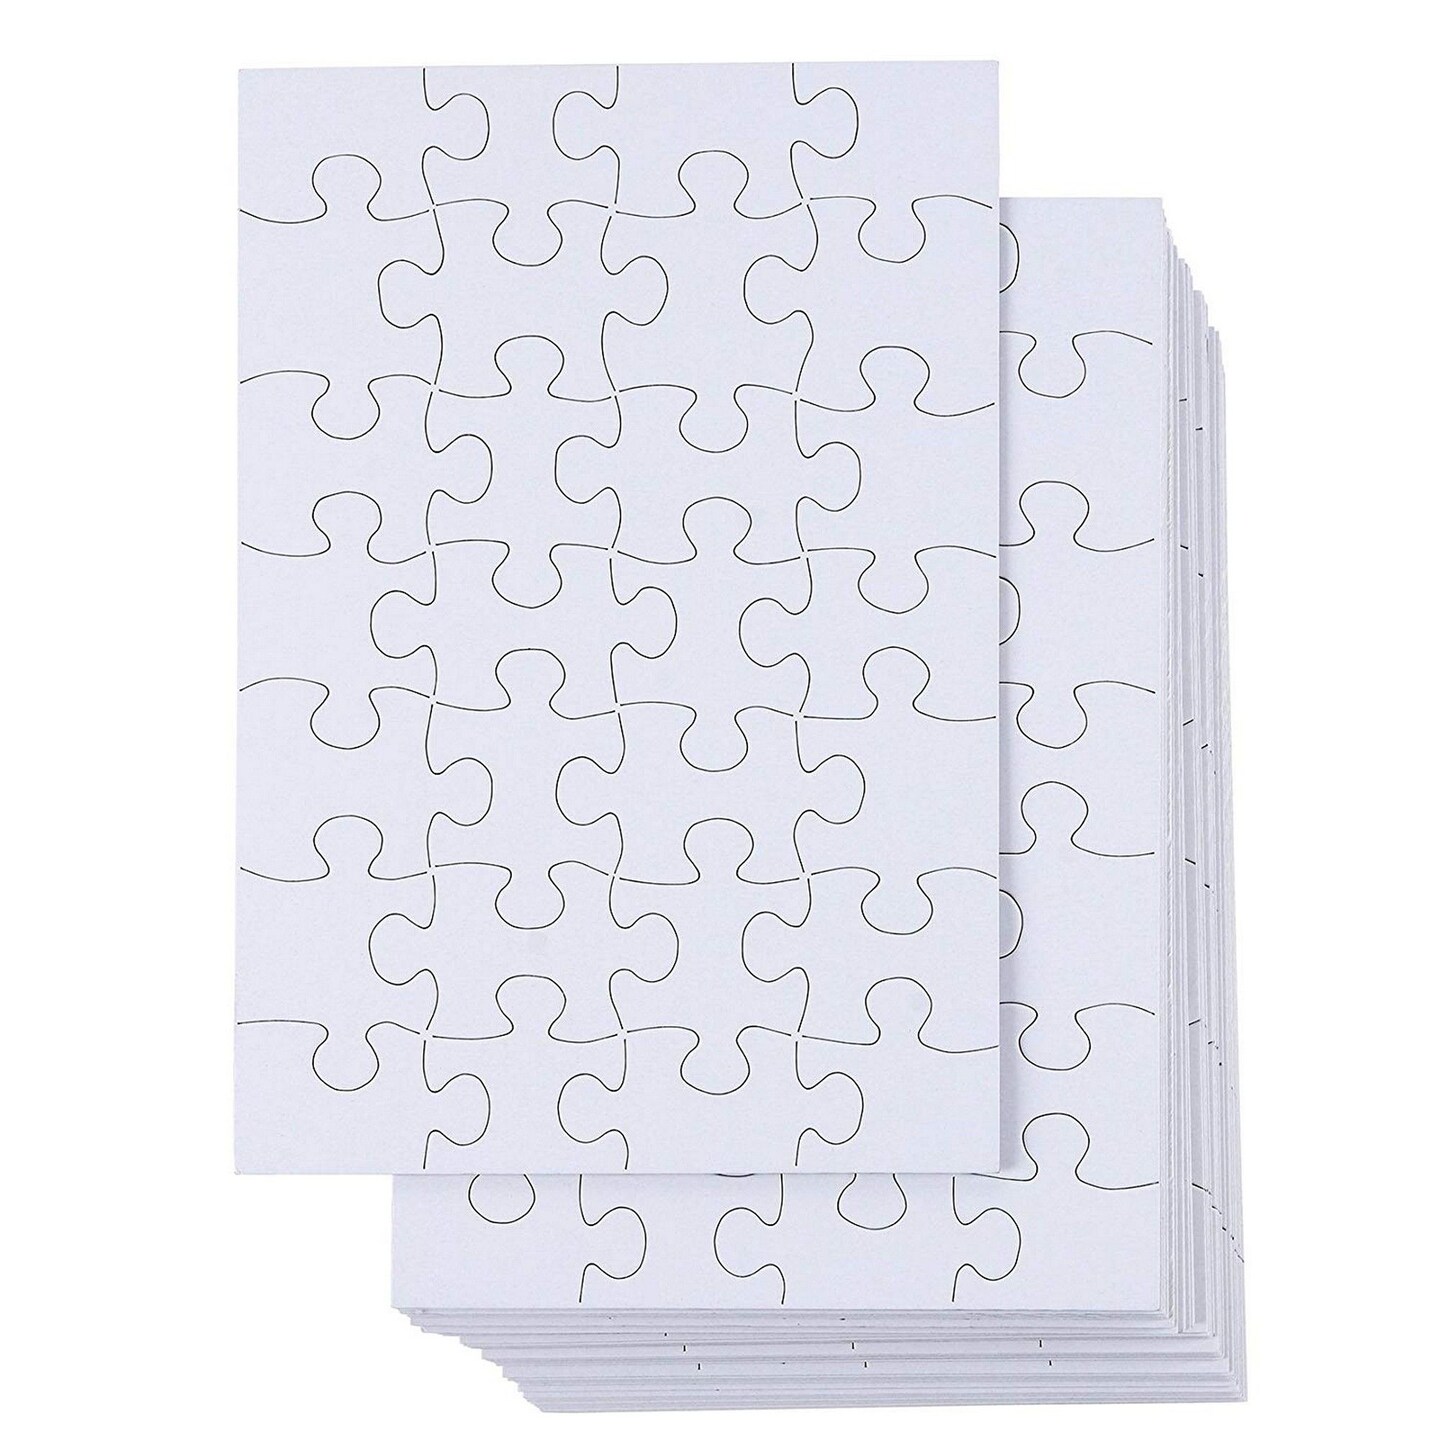 48 Pack Blank Puzzles to Draw On Bulk – Make Your Own 6x8 Inch